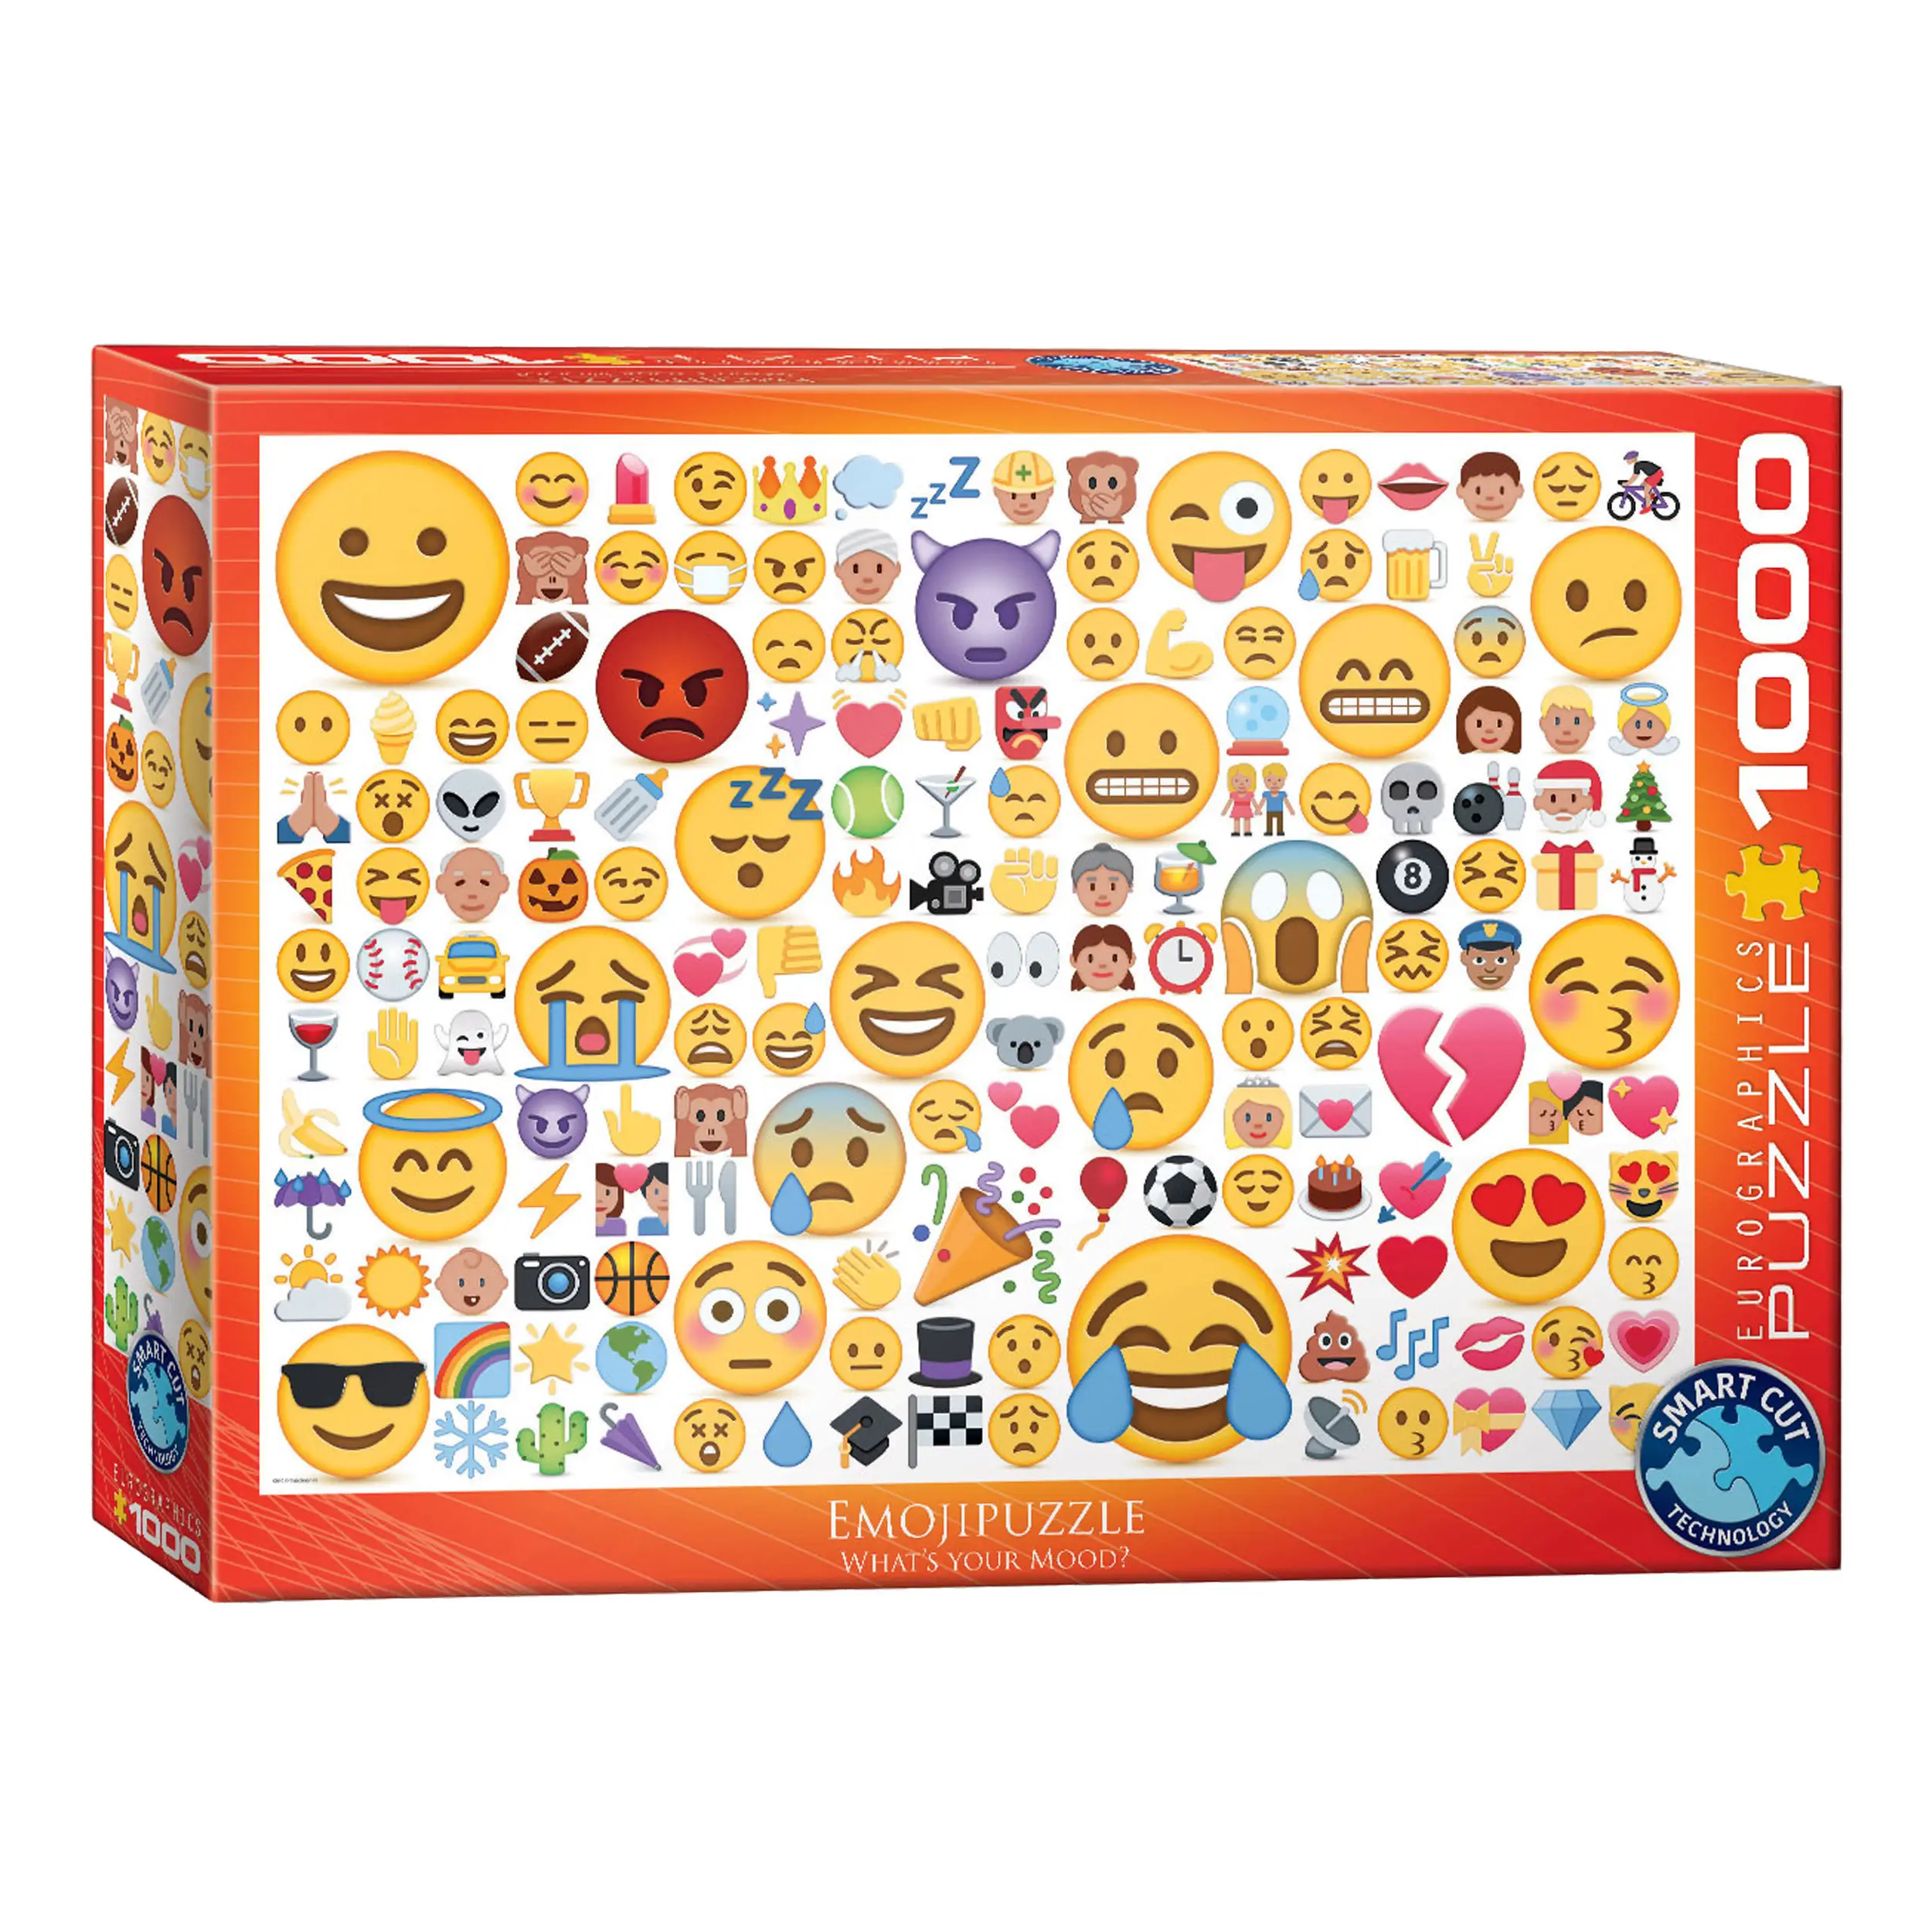 Puzzle Emotipuzzle Whats your Mood